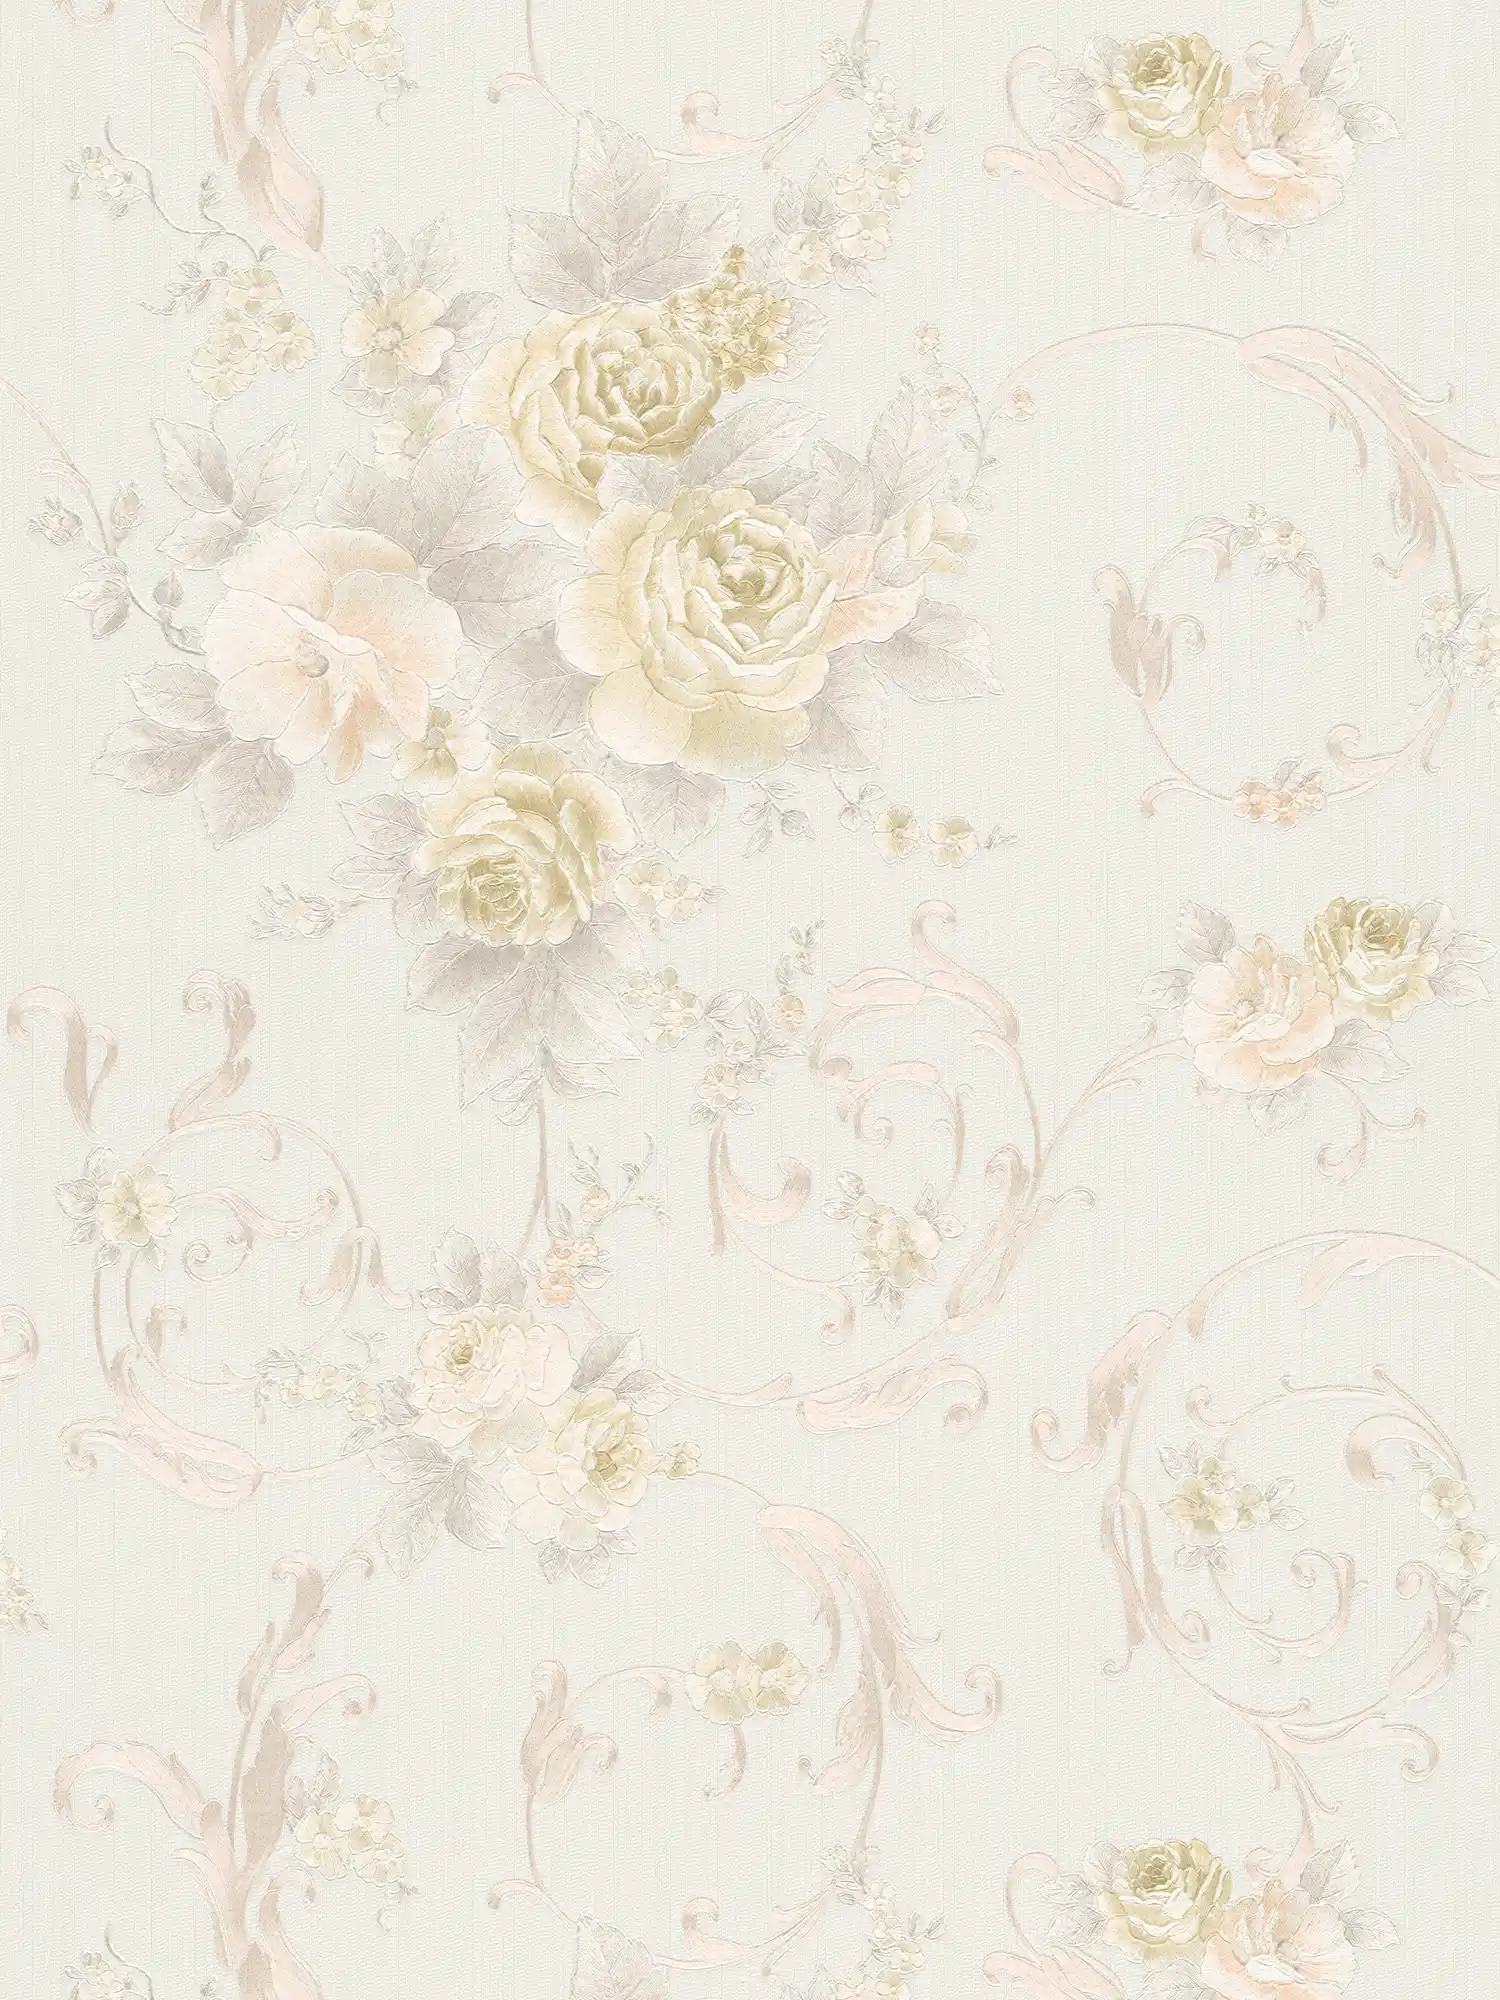 Rose petal wallpaper with metallic effect in country style - cream, grey, pink
